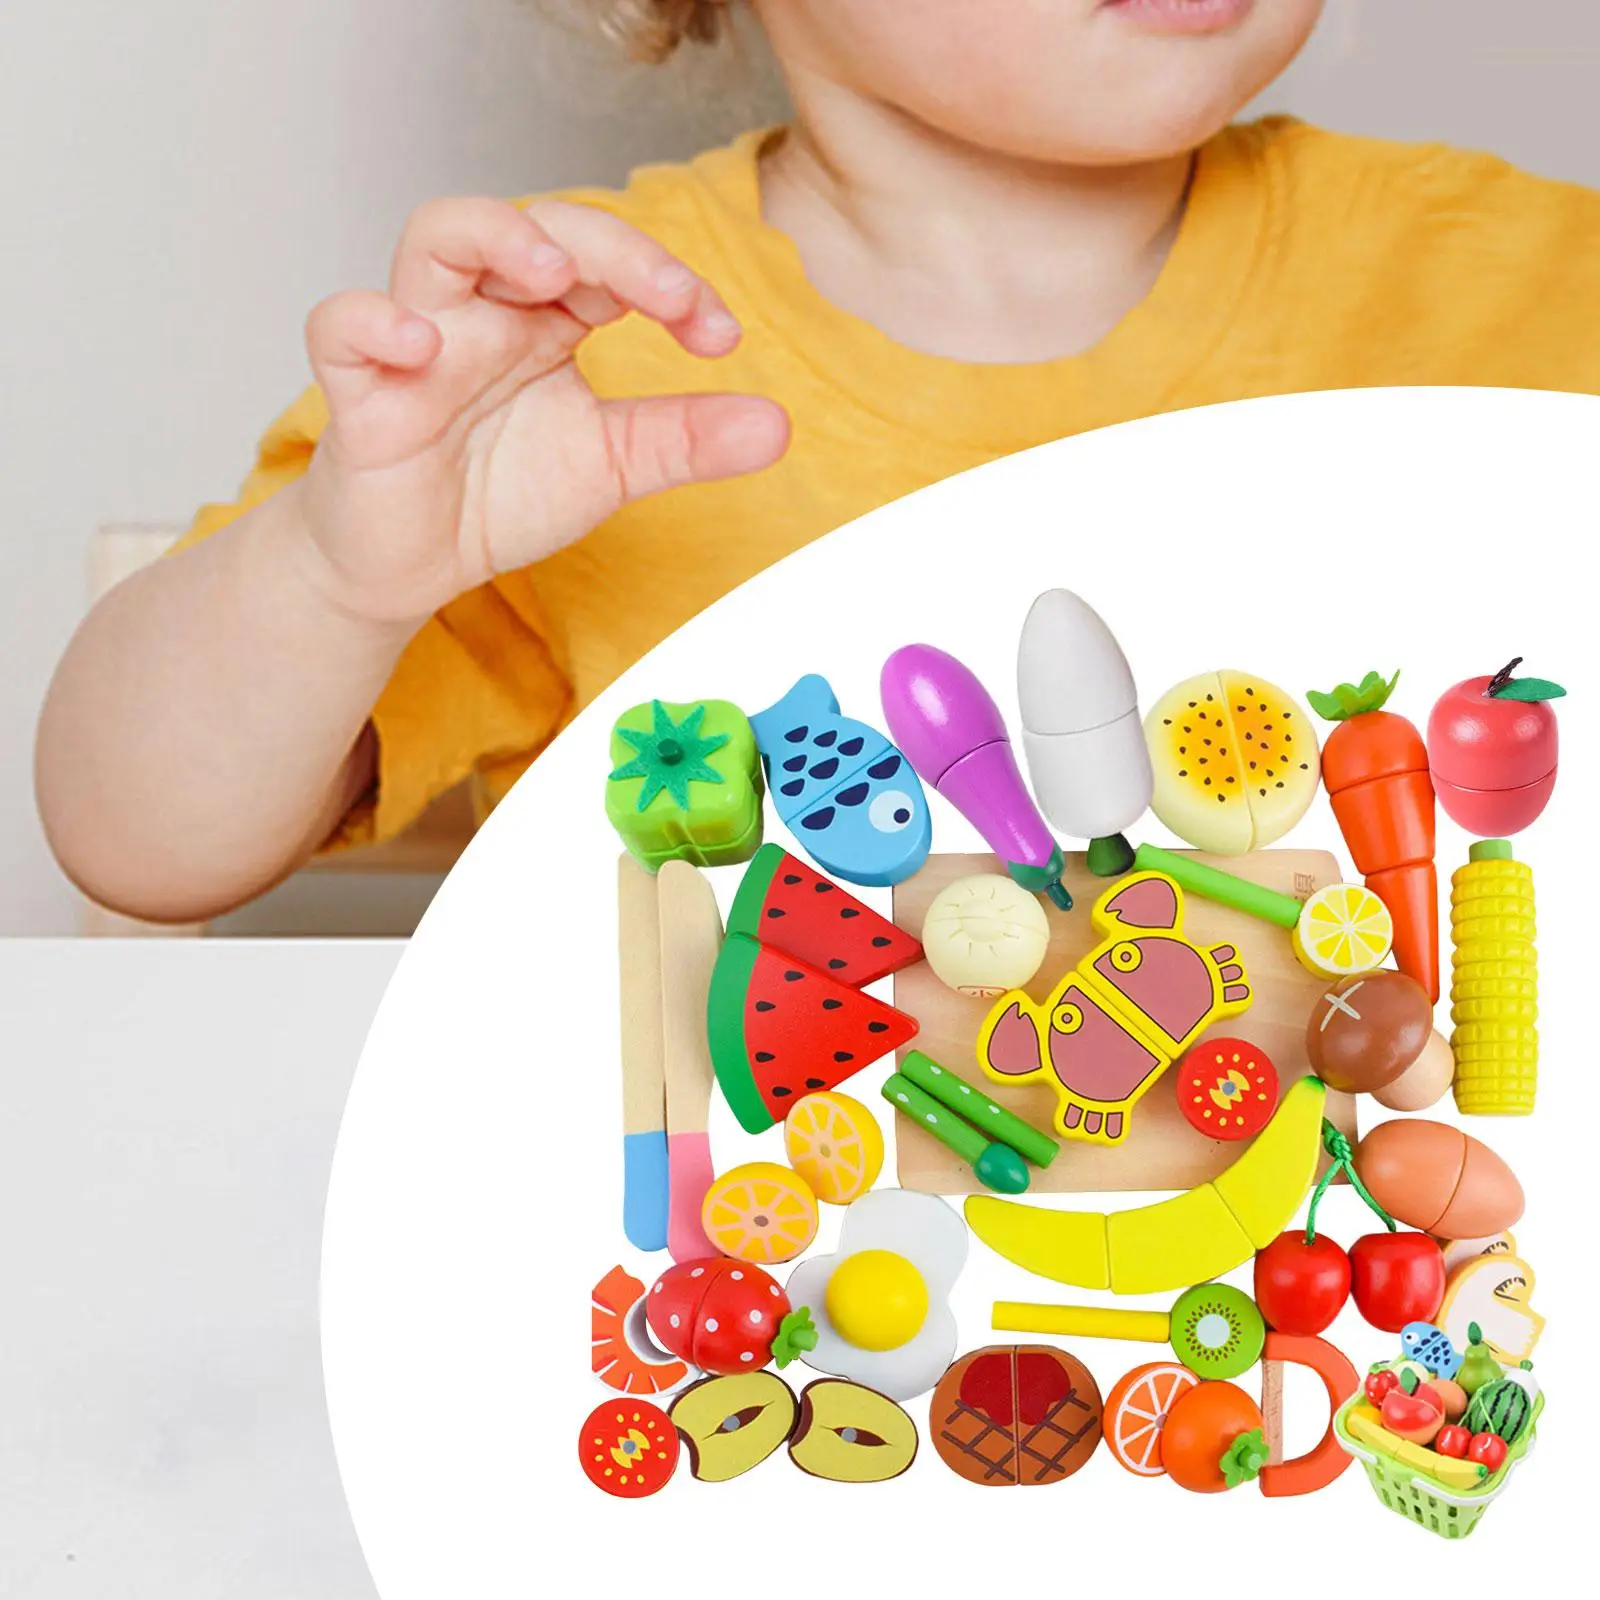 35x Cutting Fruit Vegetables Set Cutting Food Kitchen Toys Pretend Play Wooden Play Kitchen Toys for Girls Children Boys Ages 3+